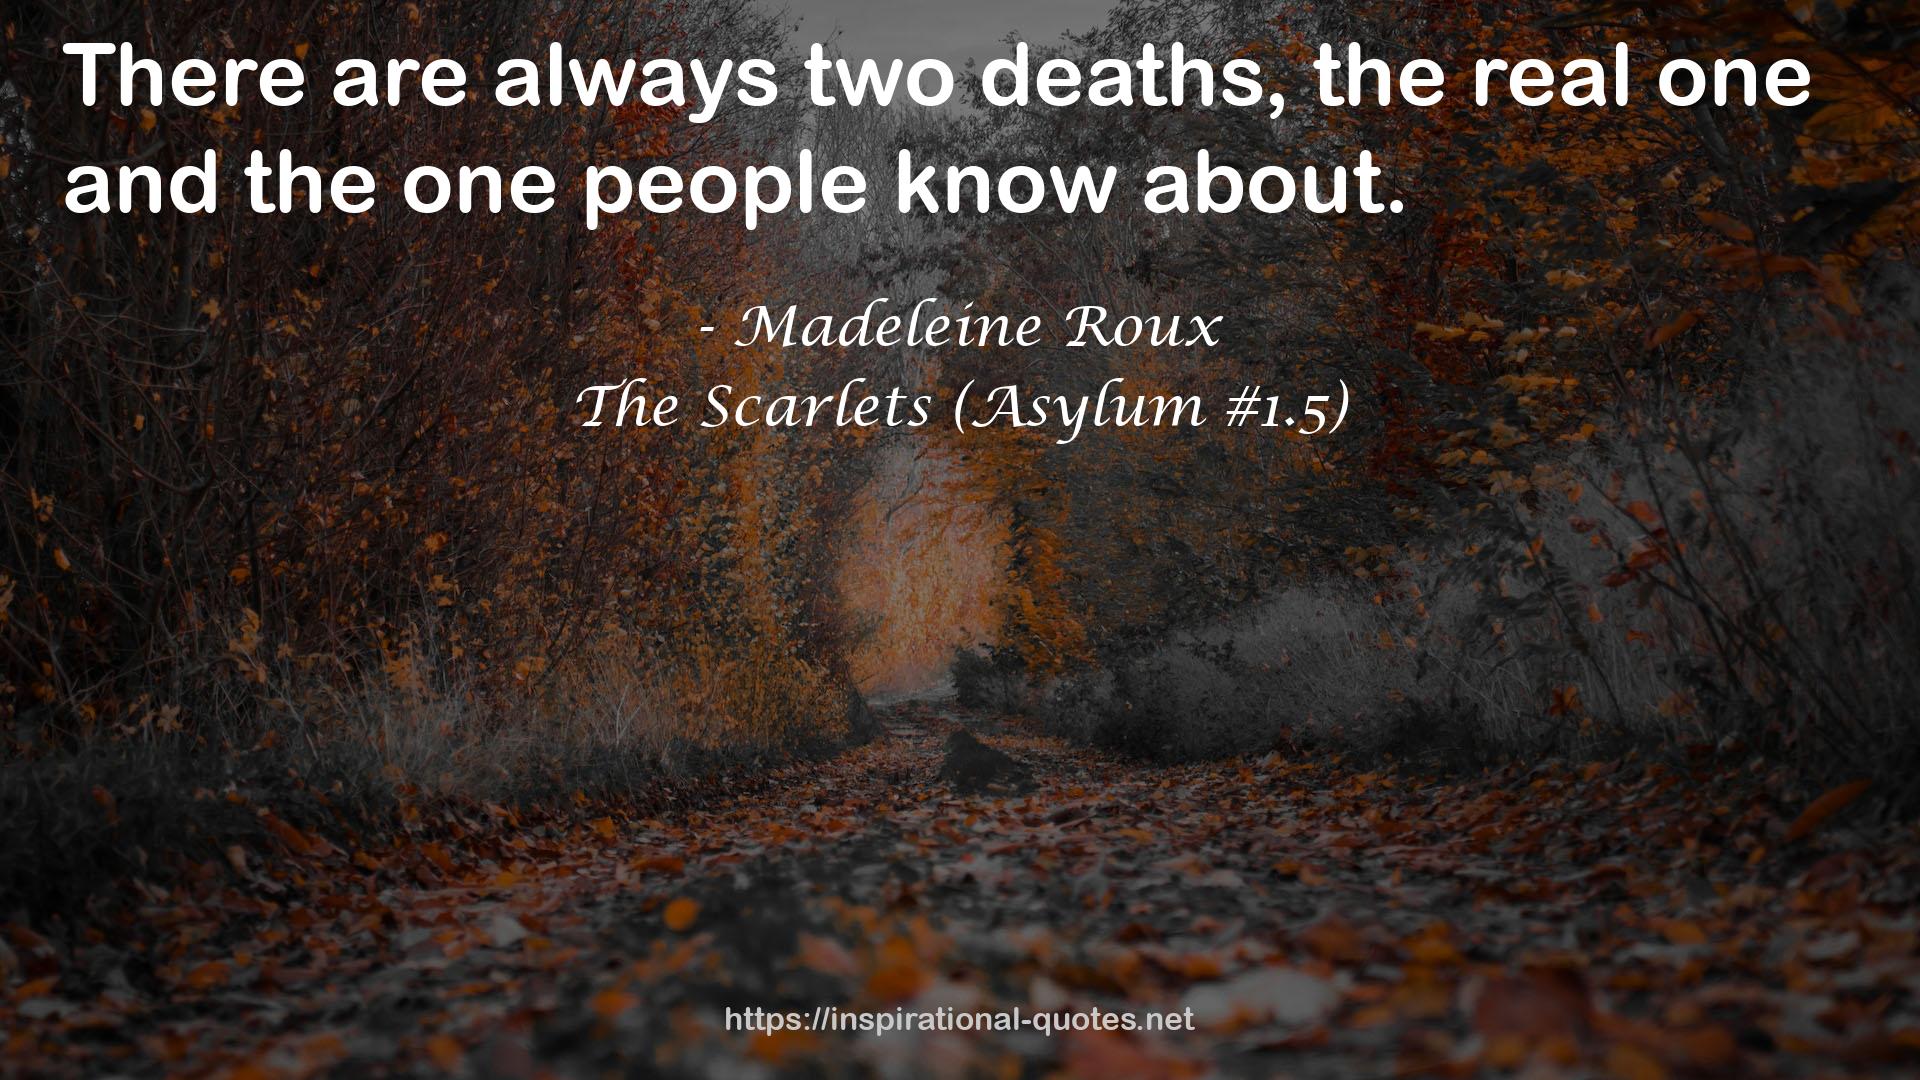 The Scarlets (Asylum #1.5) QUOTES